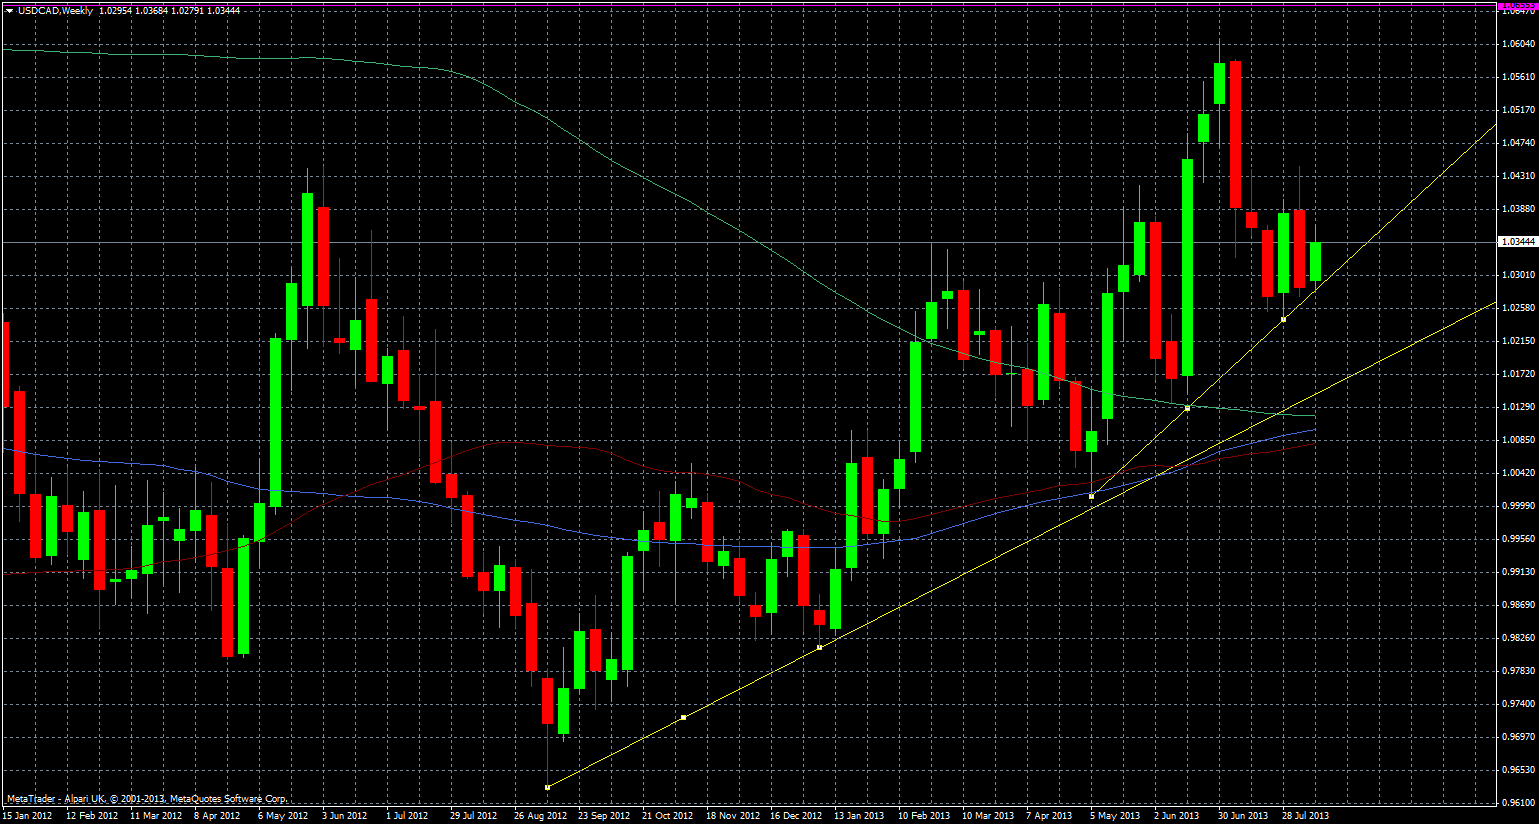 USD/CAD weekly technical analysis chart 16 August 2013